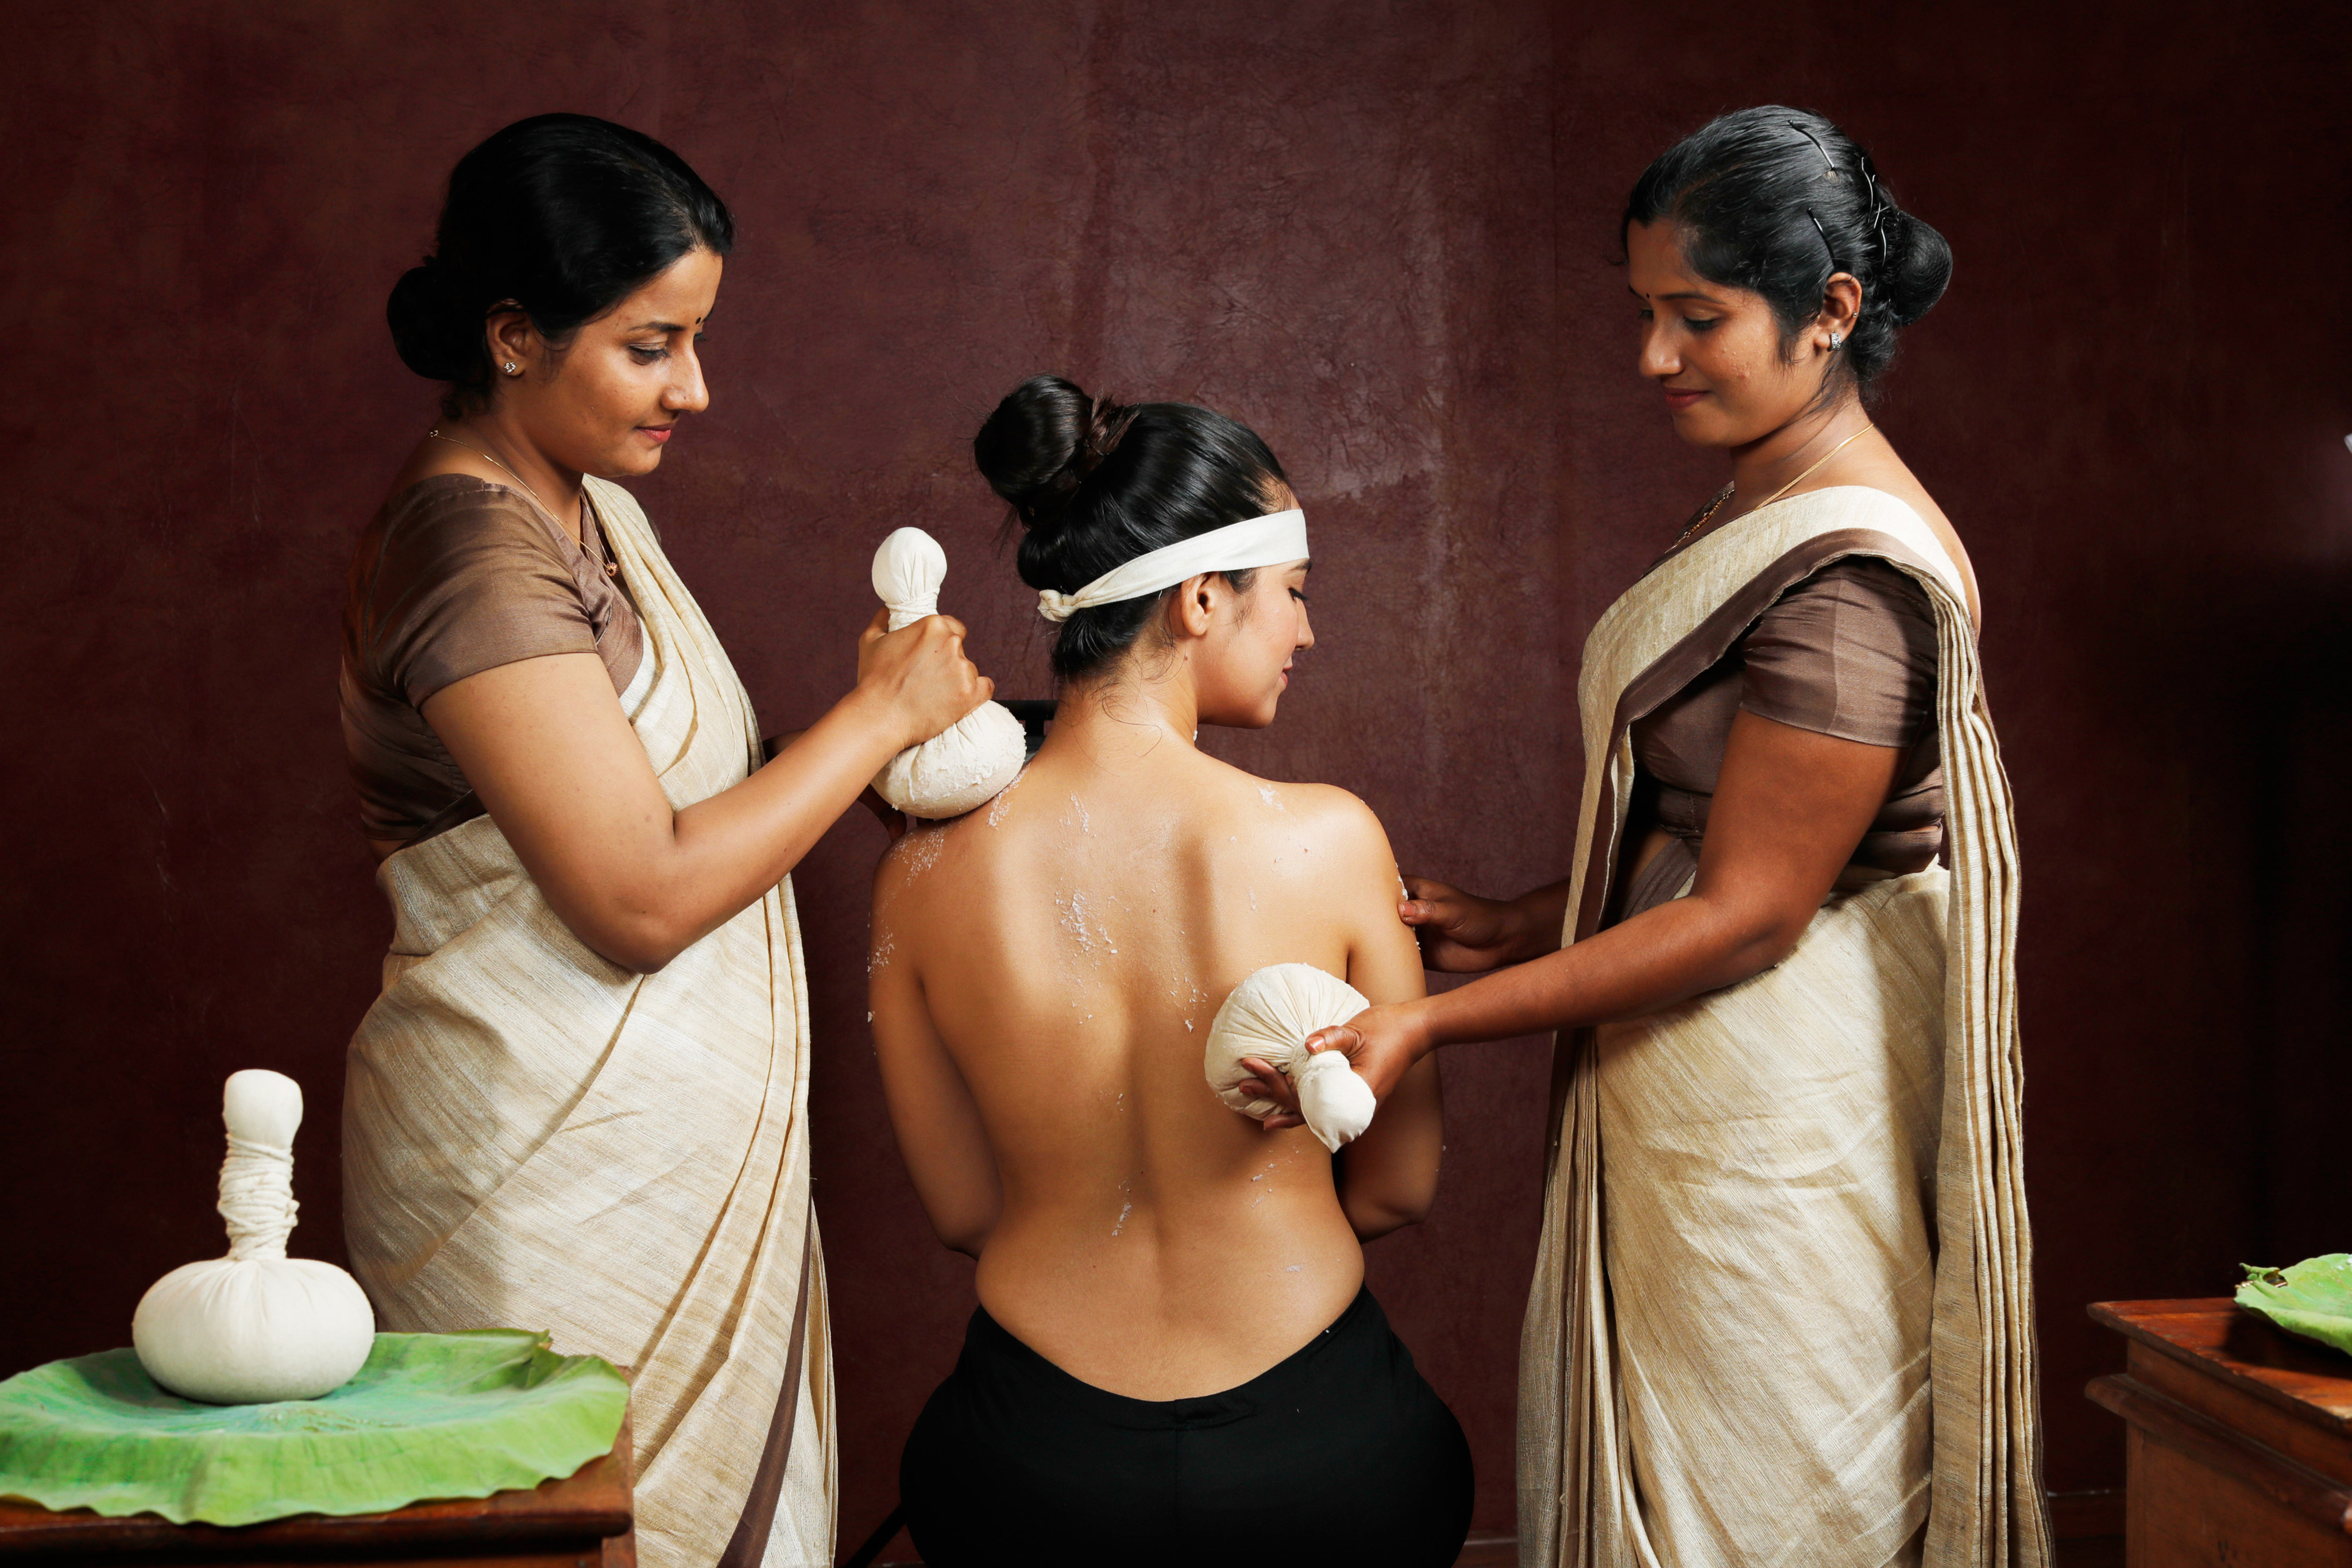 An Ayurvedic massage using heated poultices (above) is an example of the treatments available, in Kerala state and elsewhere in India, to visitors on the new Ayush visas. Photo: SCMP